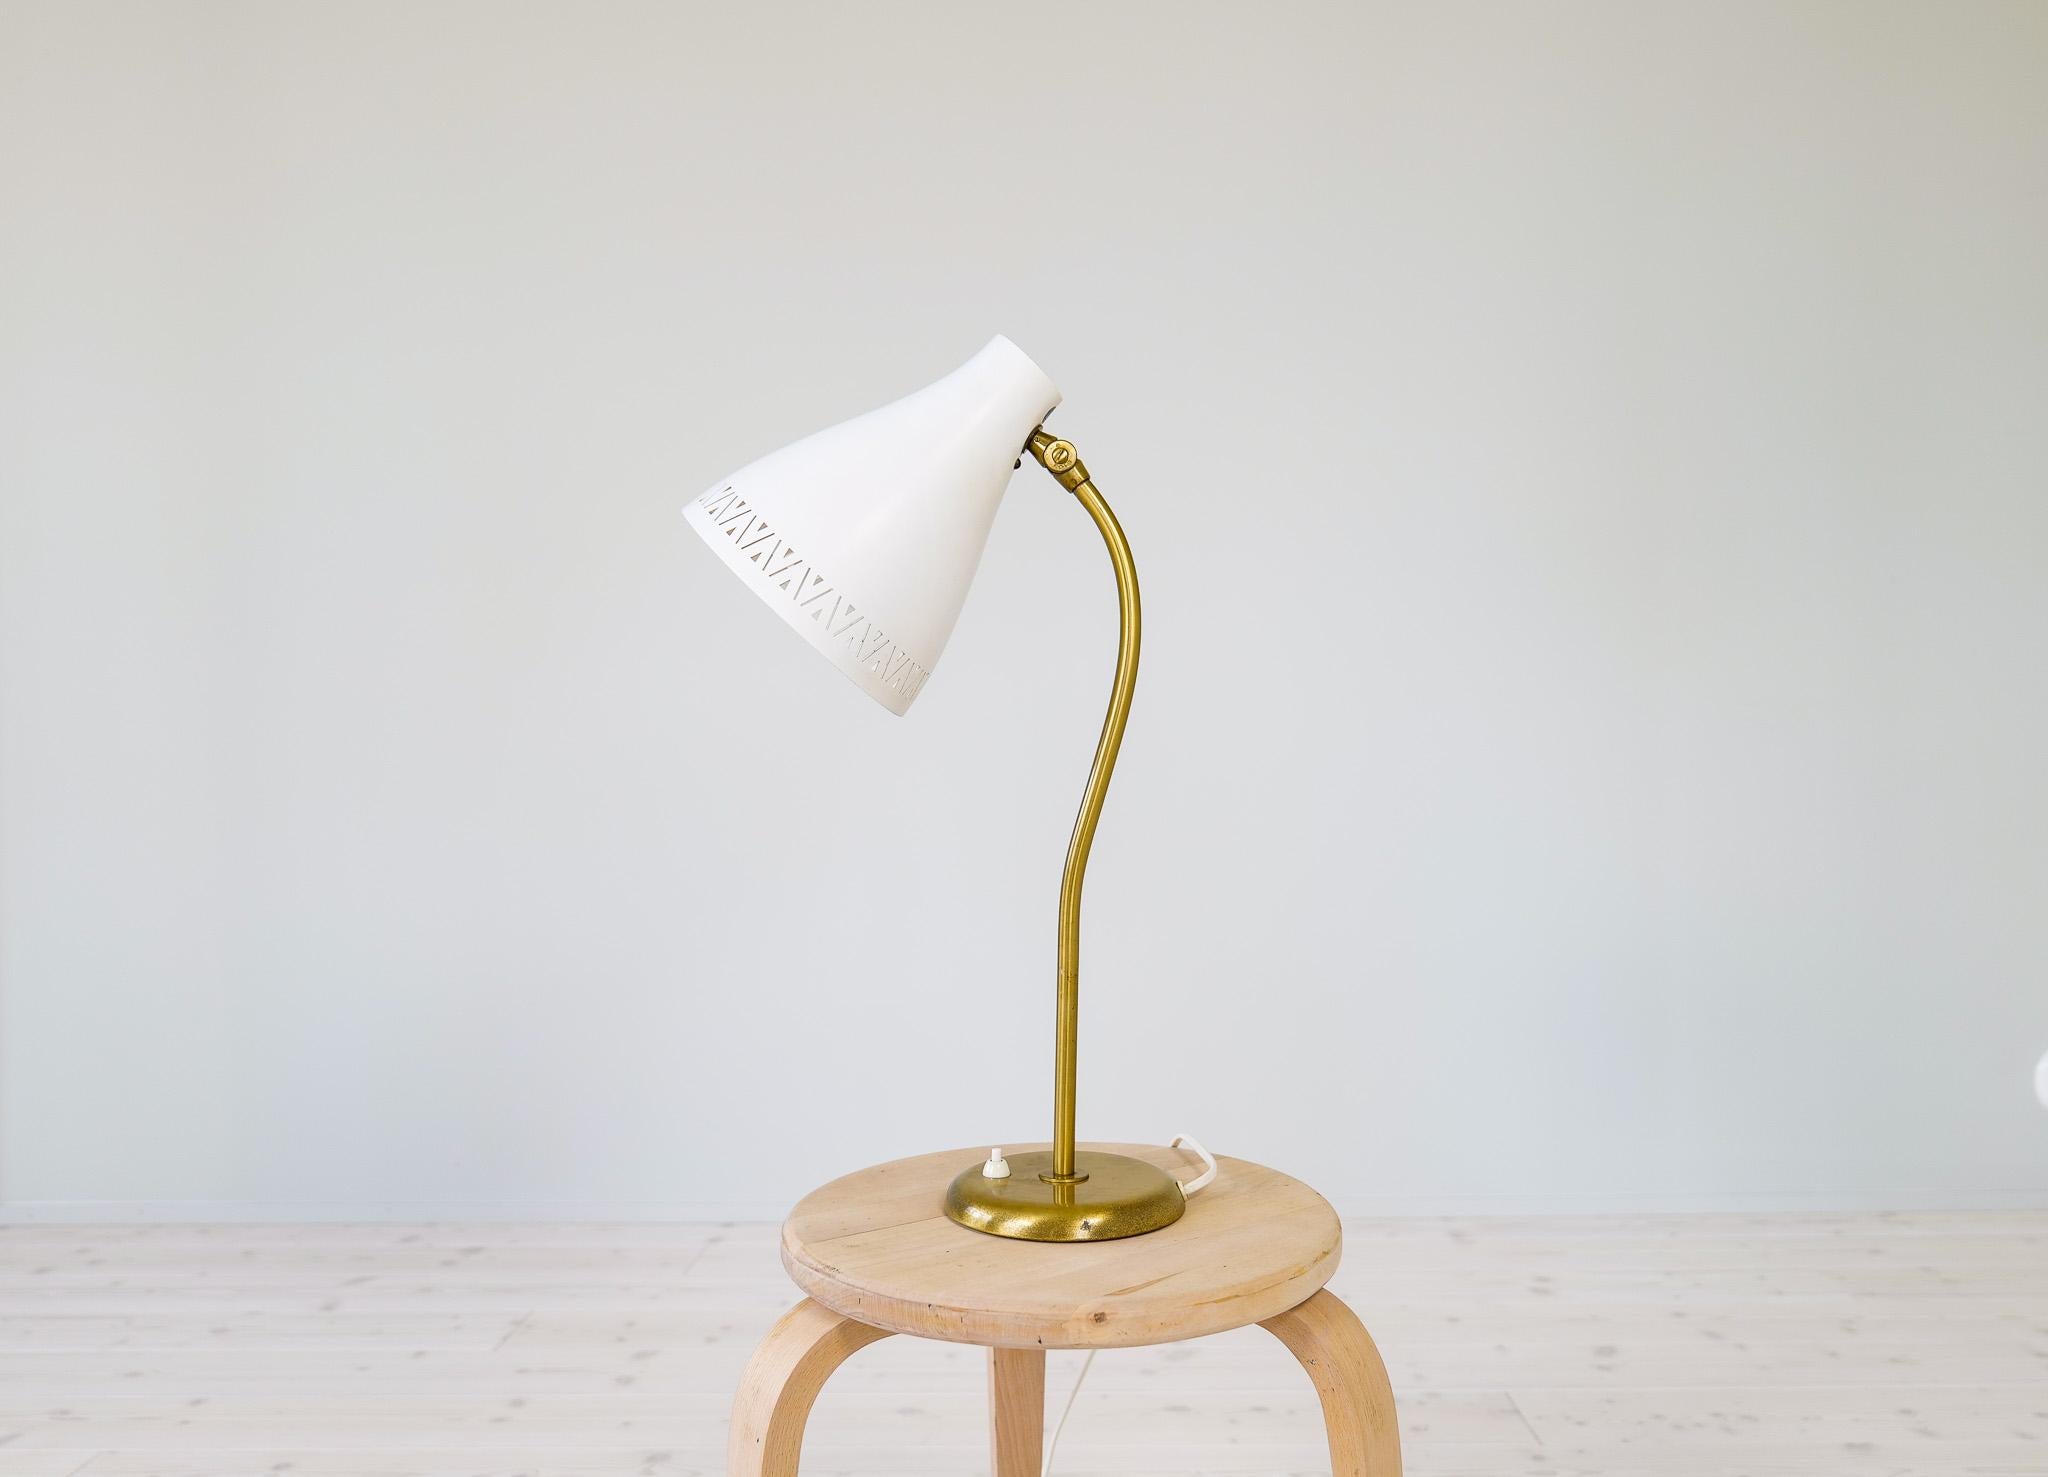 Wonderful large, and rare adjustable table lamp in brass, screen in white lacquered metal. Produced by Böhlmarks, Sweden, 1950s. The lamp shade gives a wonderful cozy light and that great impression of midcentury modern design. 

Good vintage